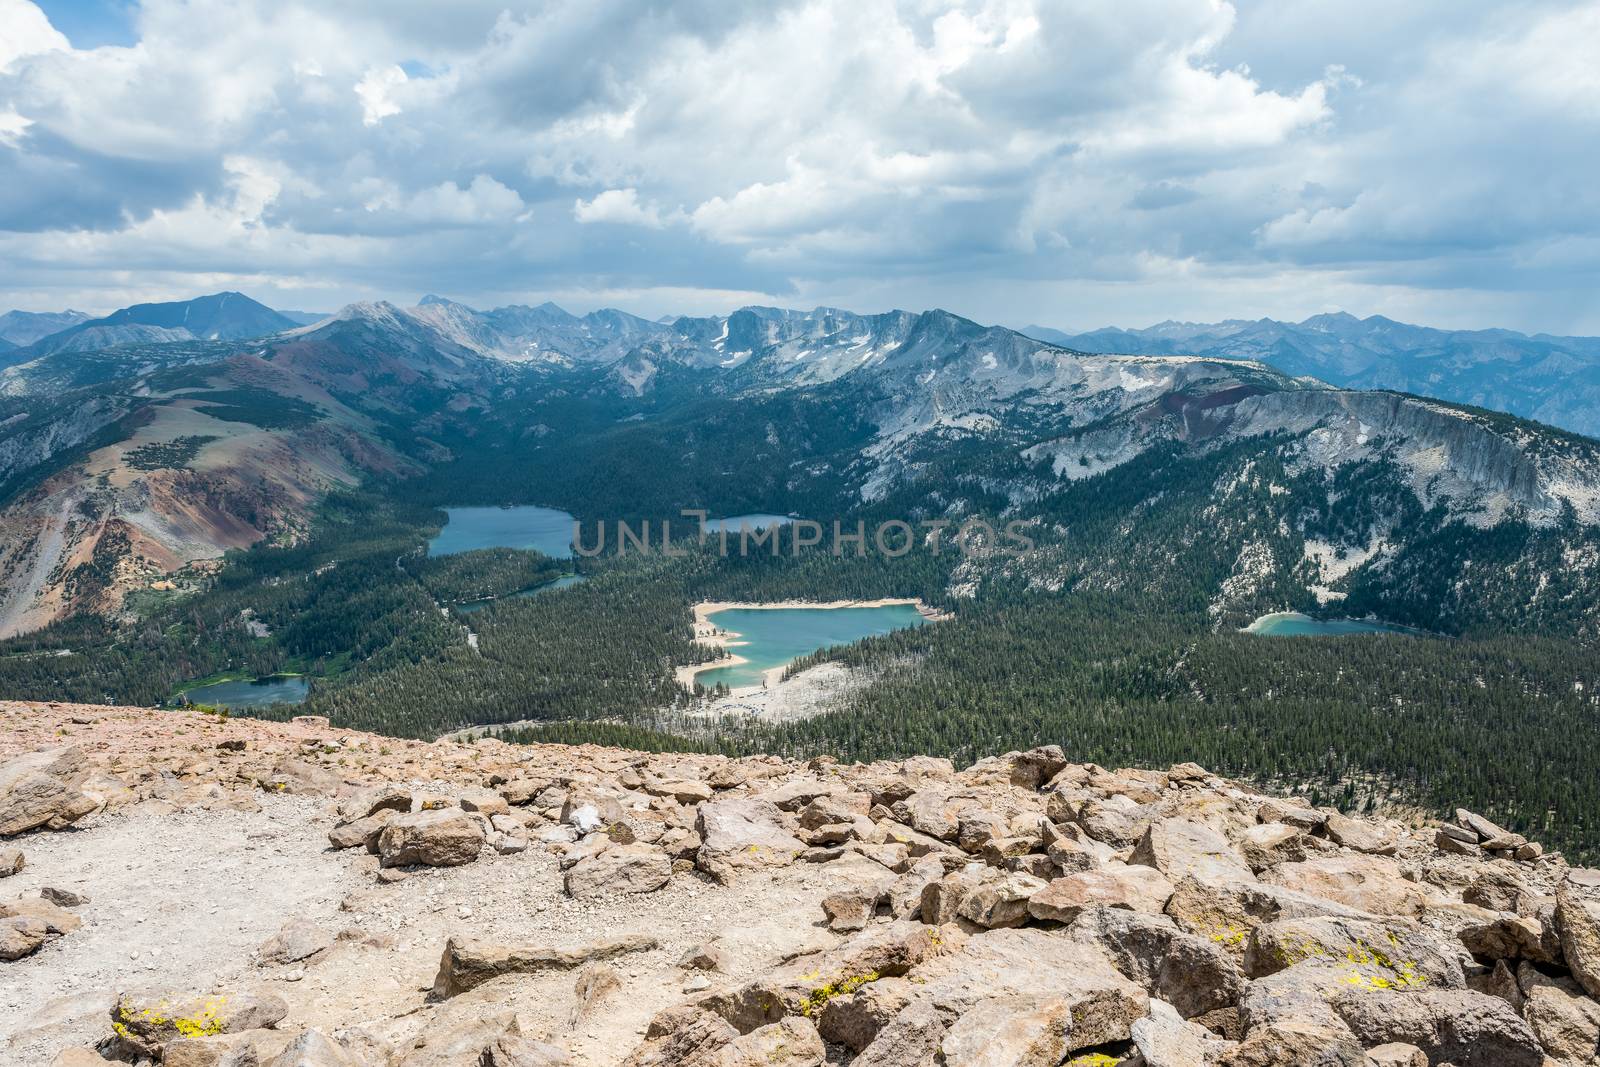 Looking down on a valley with the sub-alpine lakes of Twin, Mamie, Mary, George, and Horseshoe from the top of Mammoth Mountain, California by Njean